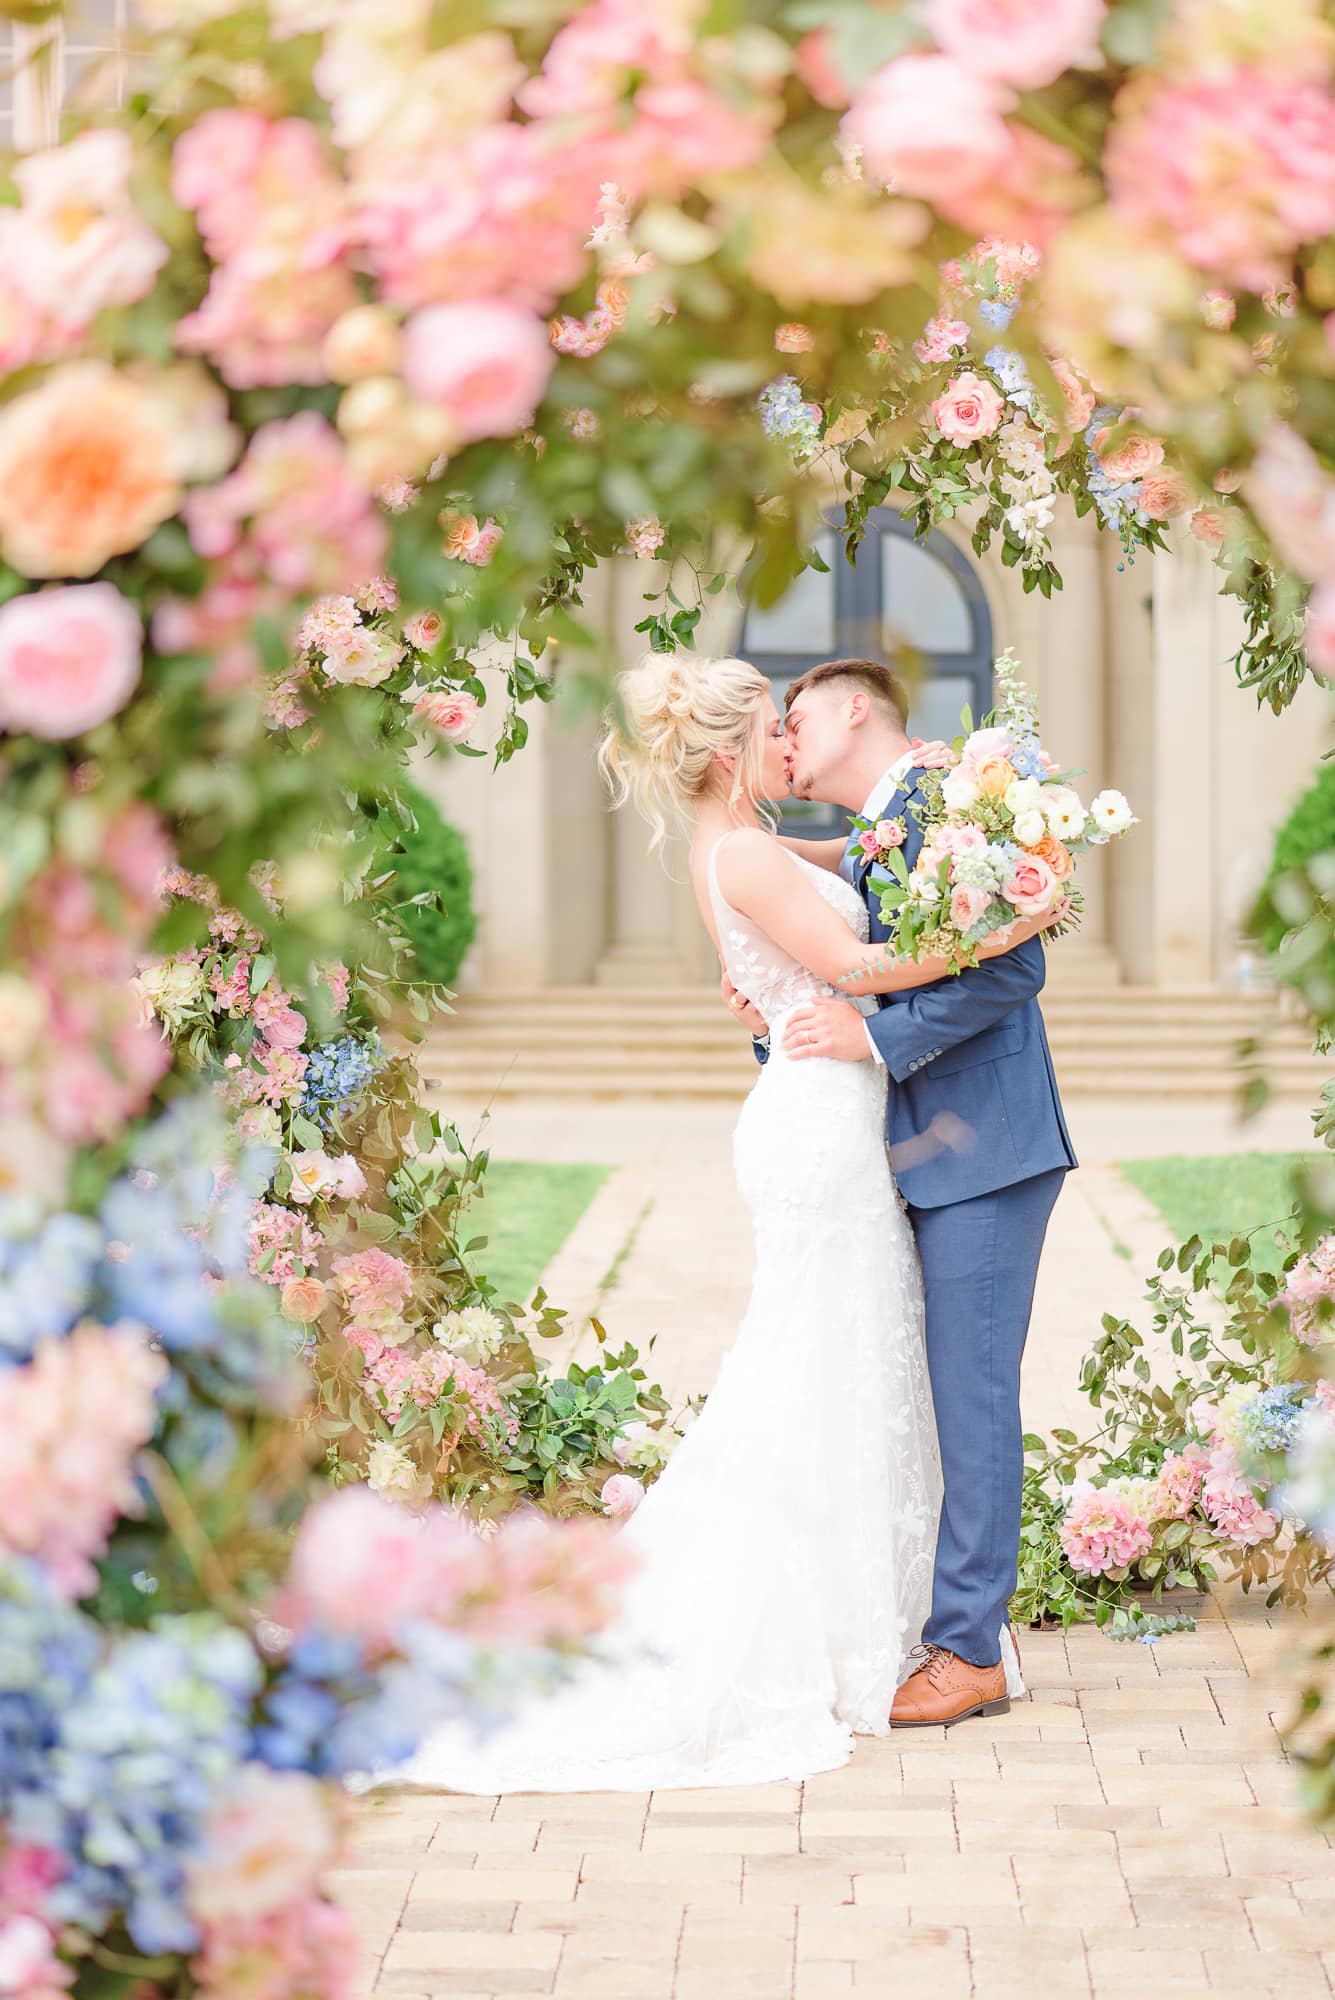 The backdrop with flowers creates a flower tunnel around the couple while they kiss.